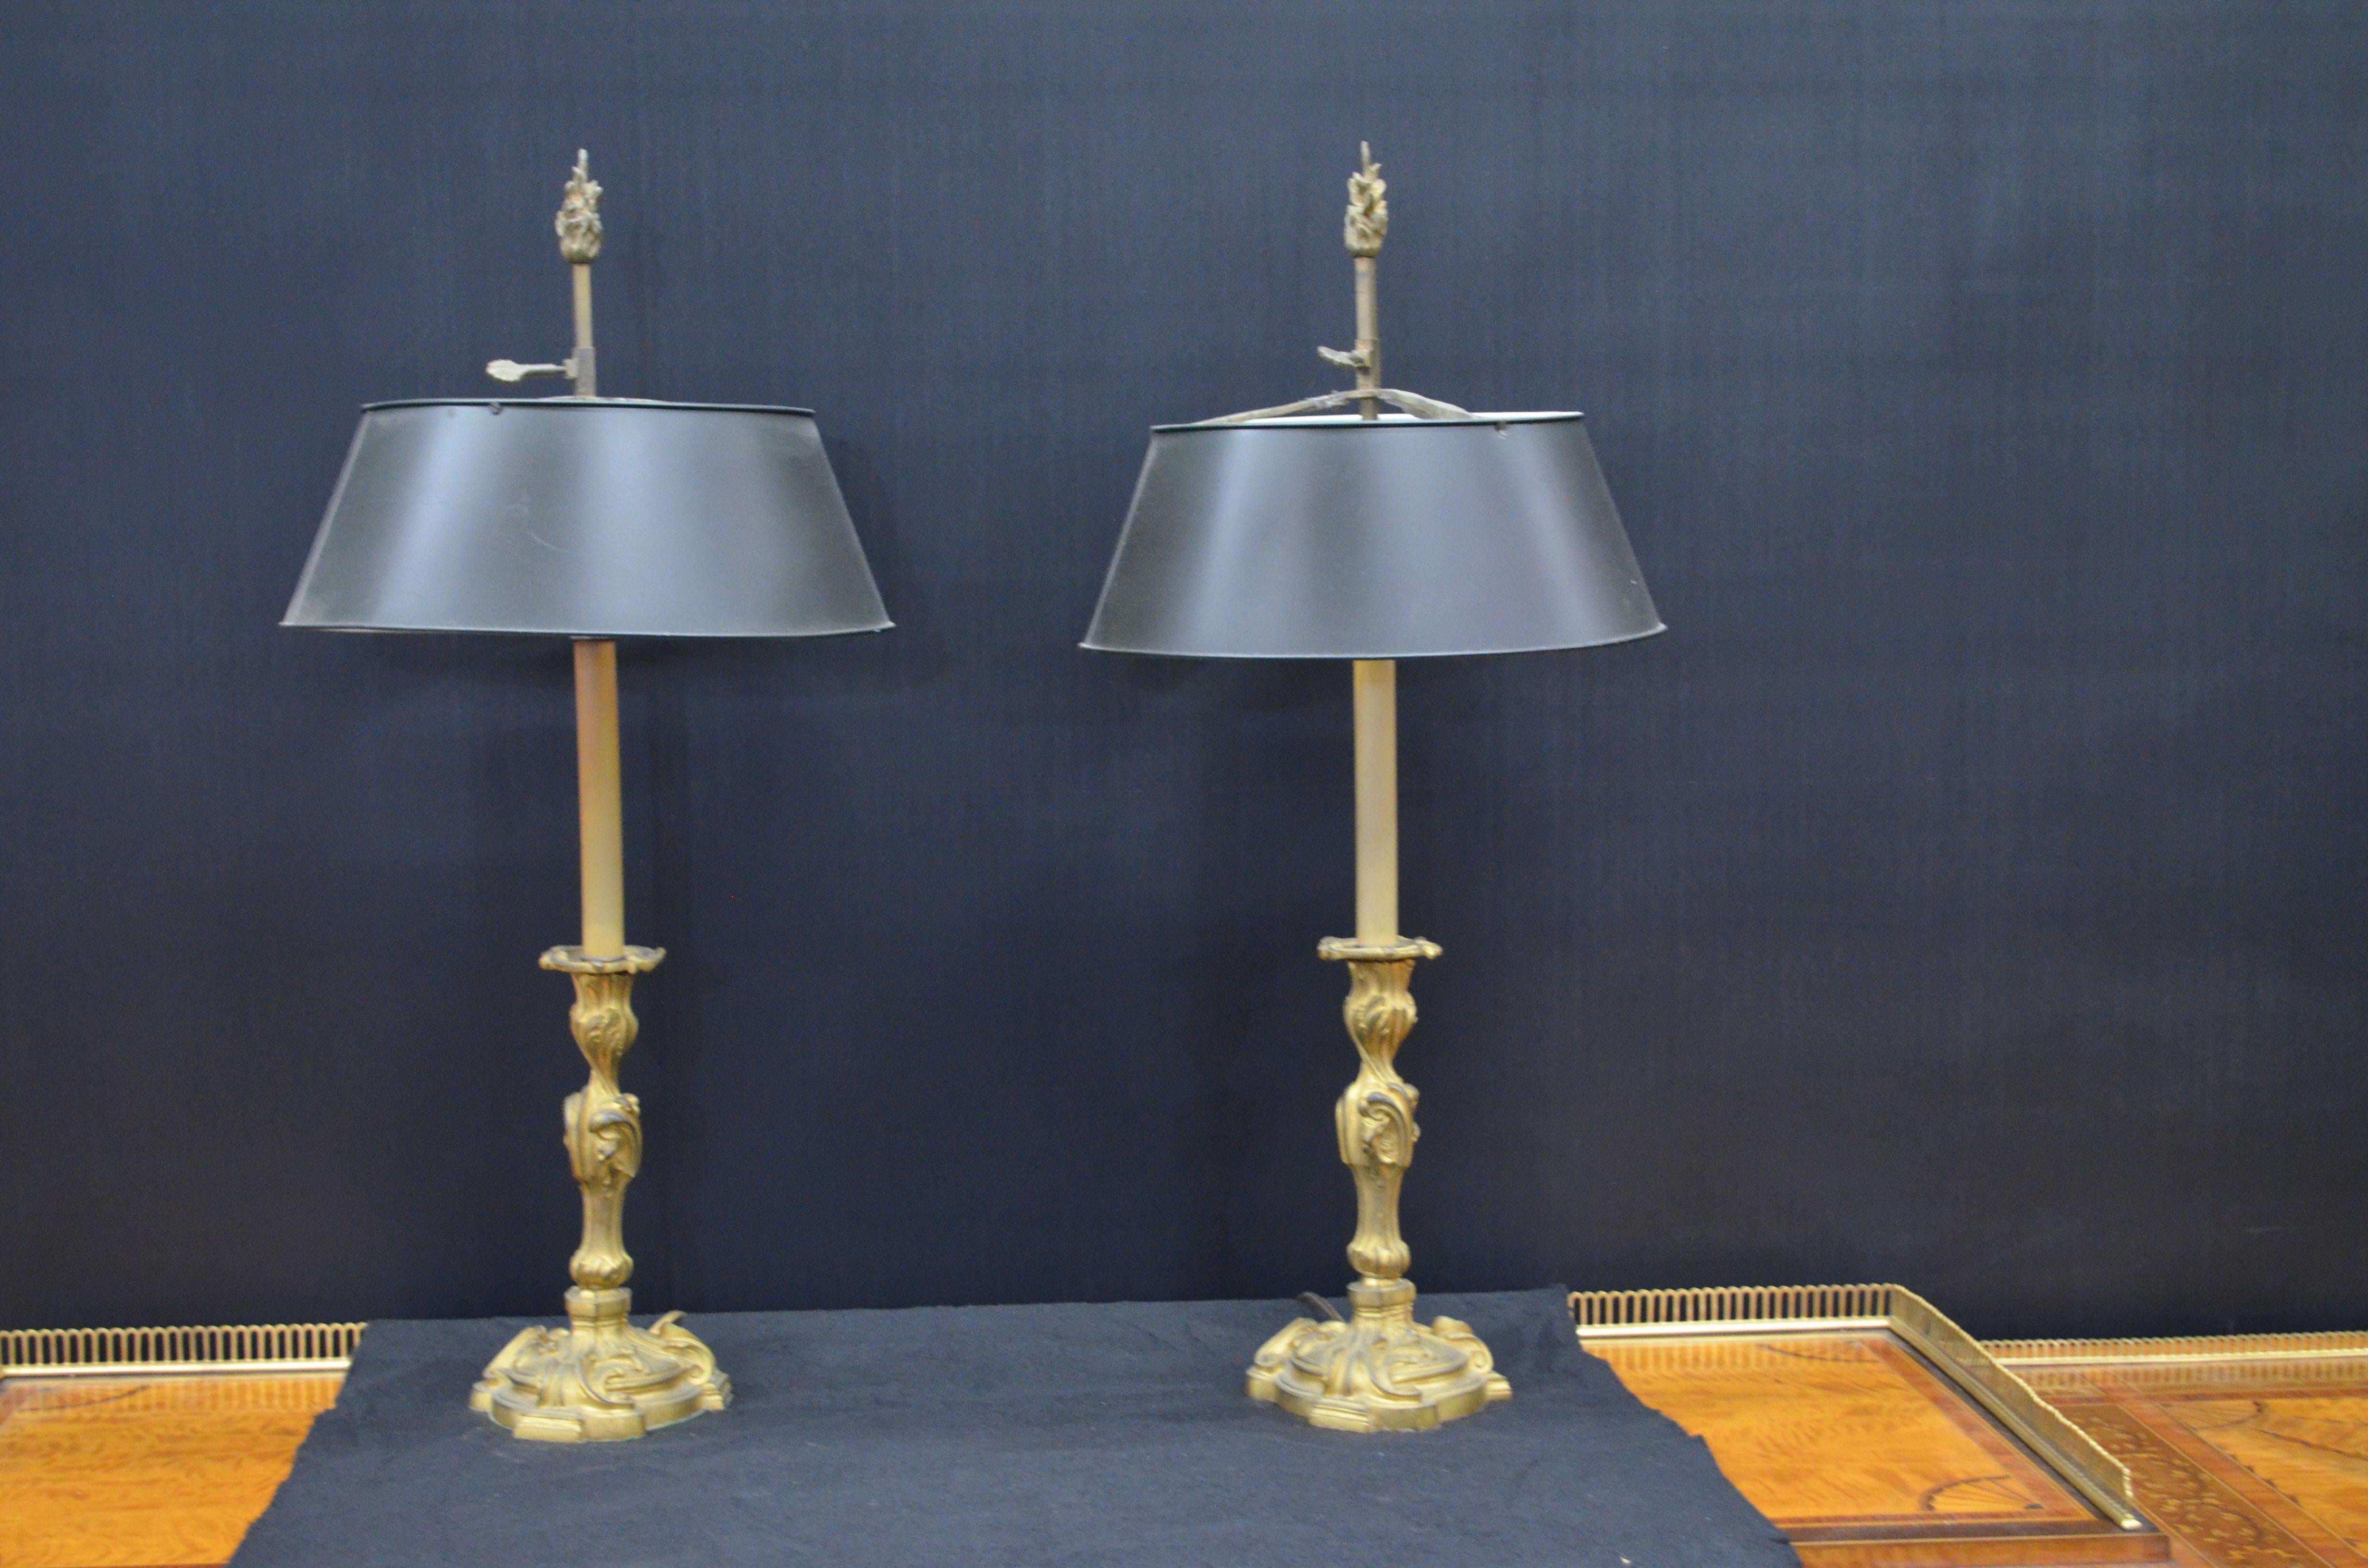 Regal Pair of French Louis XV Bronze Dore´ Candlesticks Mounted as Lamps with Black painted Tole Bouillotte Shades. The French Louis XV Gilded Bronze Candlesticks have a Foliate Tri-Scalloped Circular Raised Base. The Central Gilt Rococo Stems of